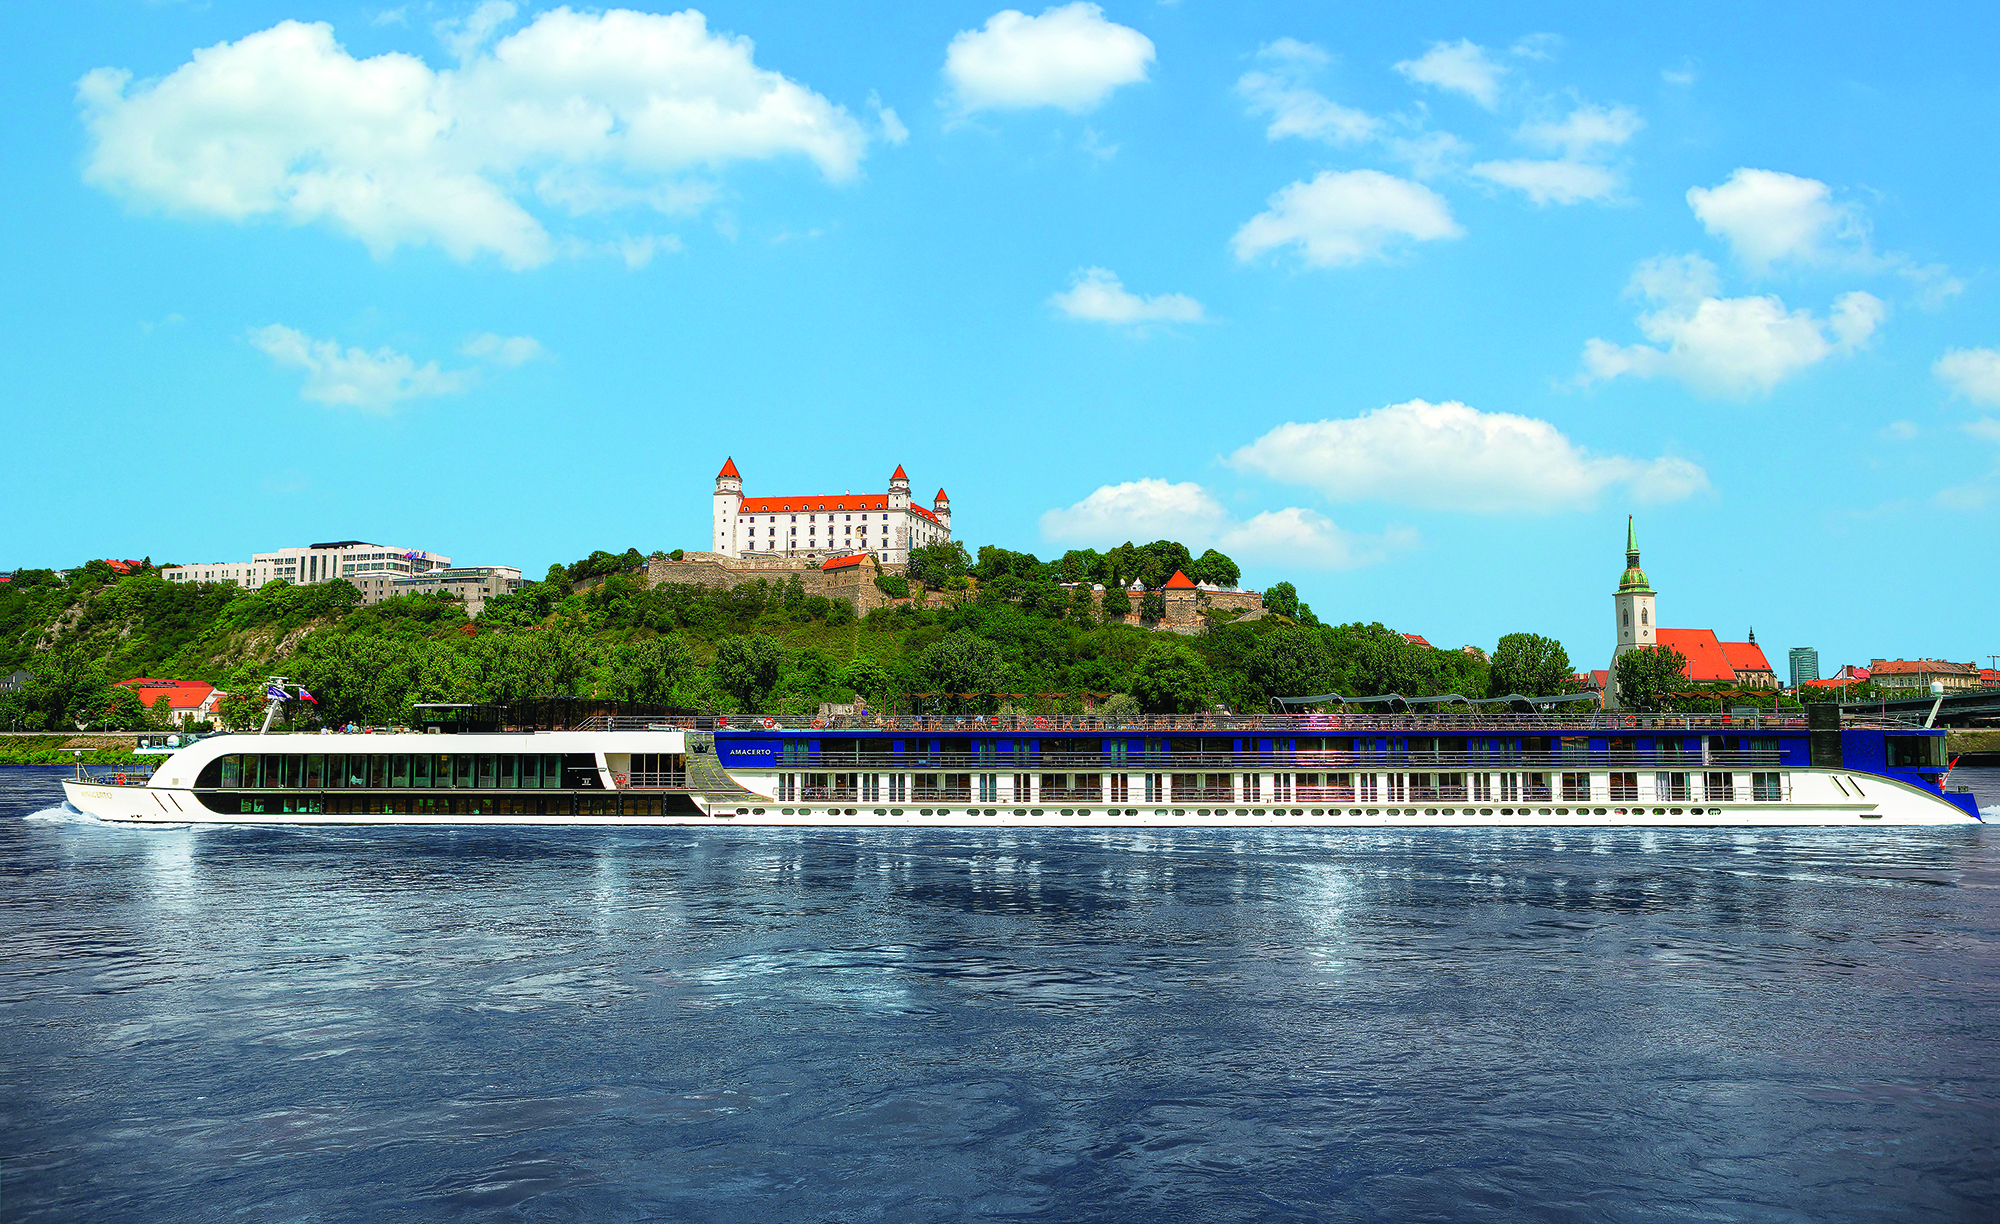 AmaWaterways Kicks off River Cruise Season with Single Supplement Waiver